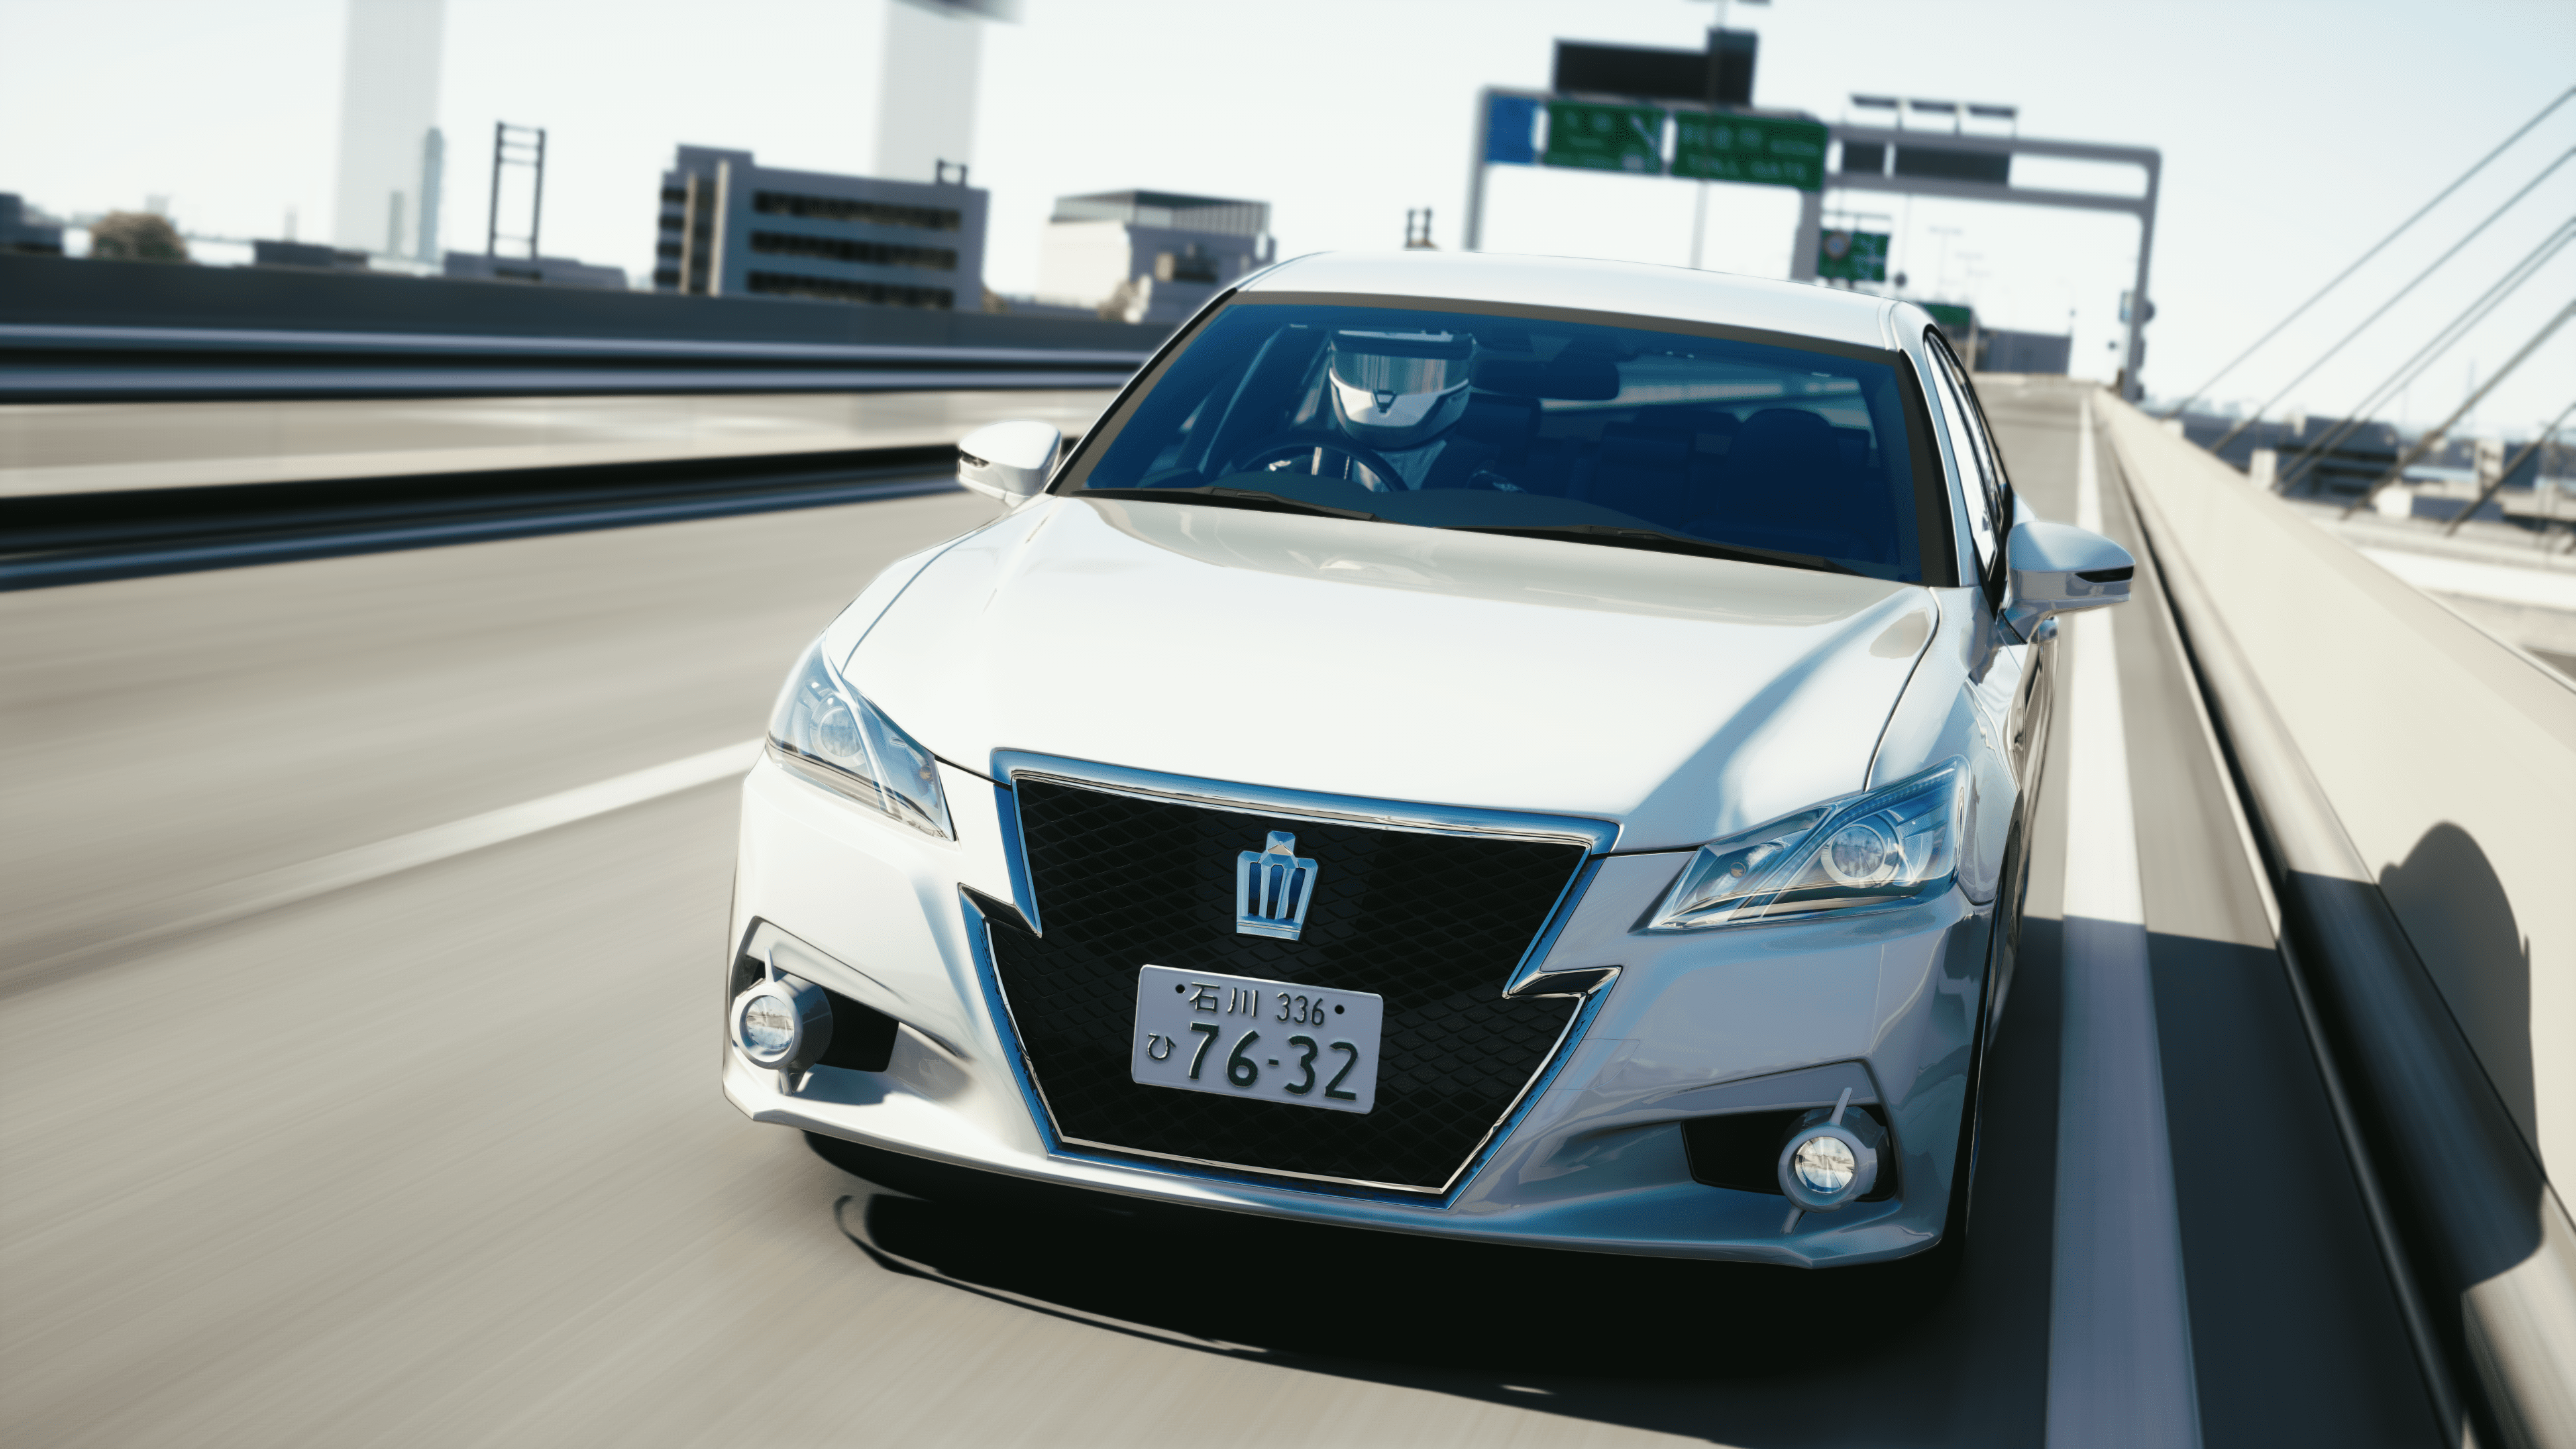 20210525-124851-shuto_revival_project_beta-toyota_crown_fix.png